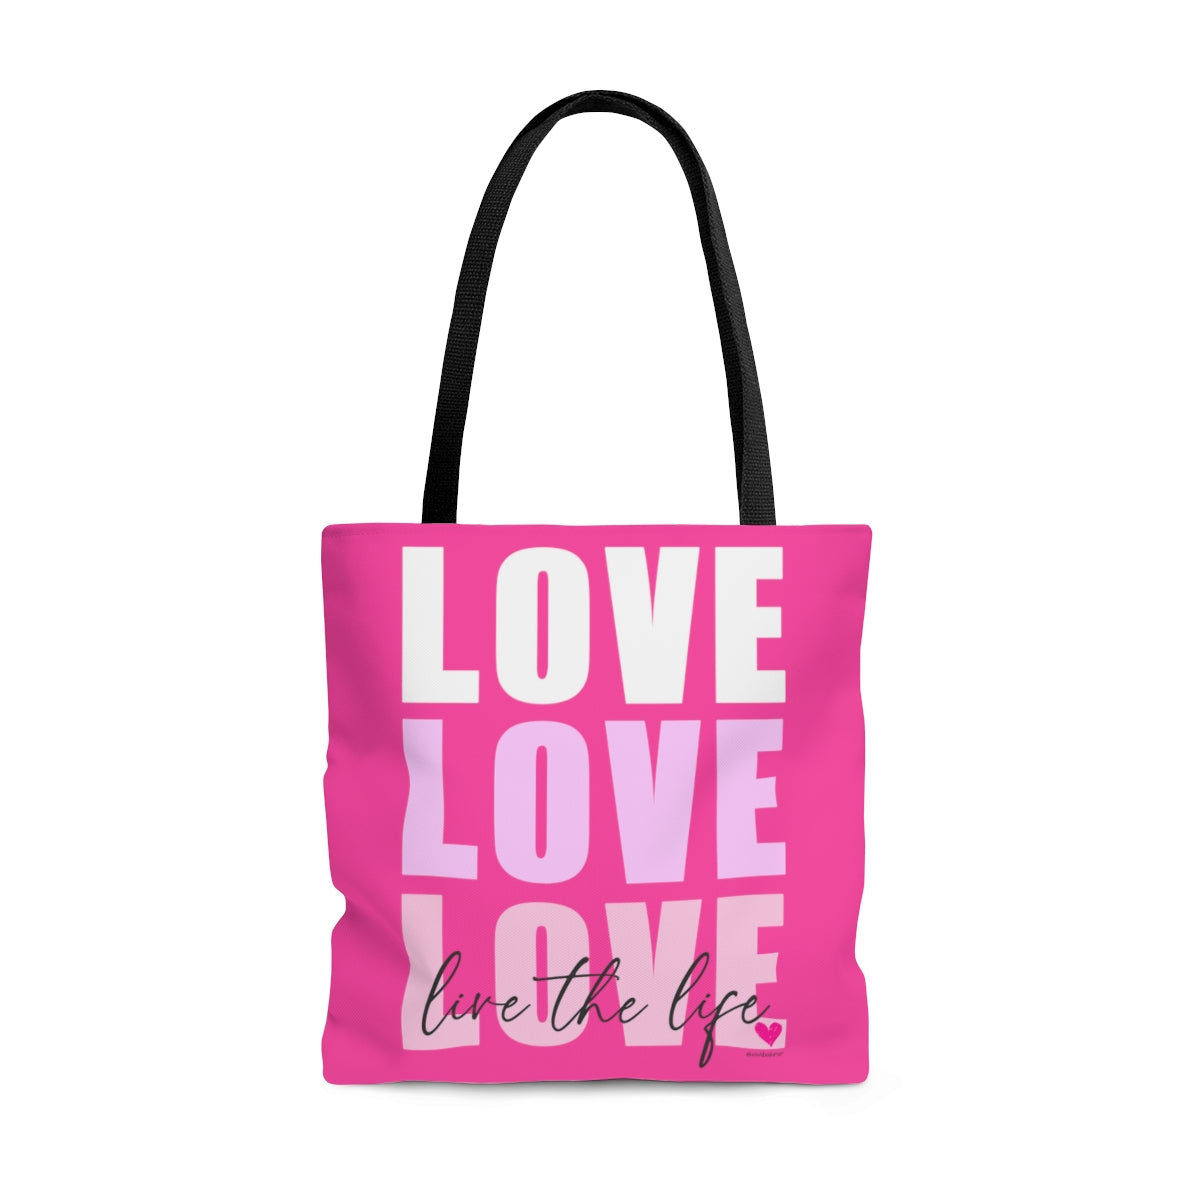 ♡ LOVE .: Live the Life ::  PRACTICAL TOTE BAG